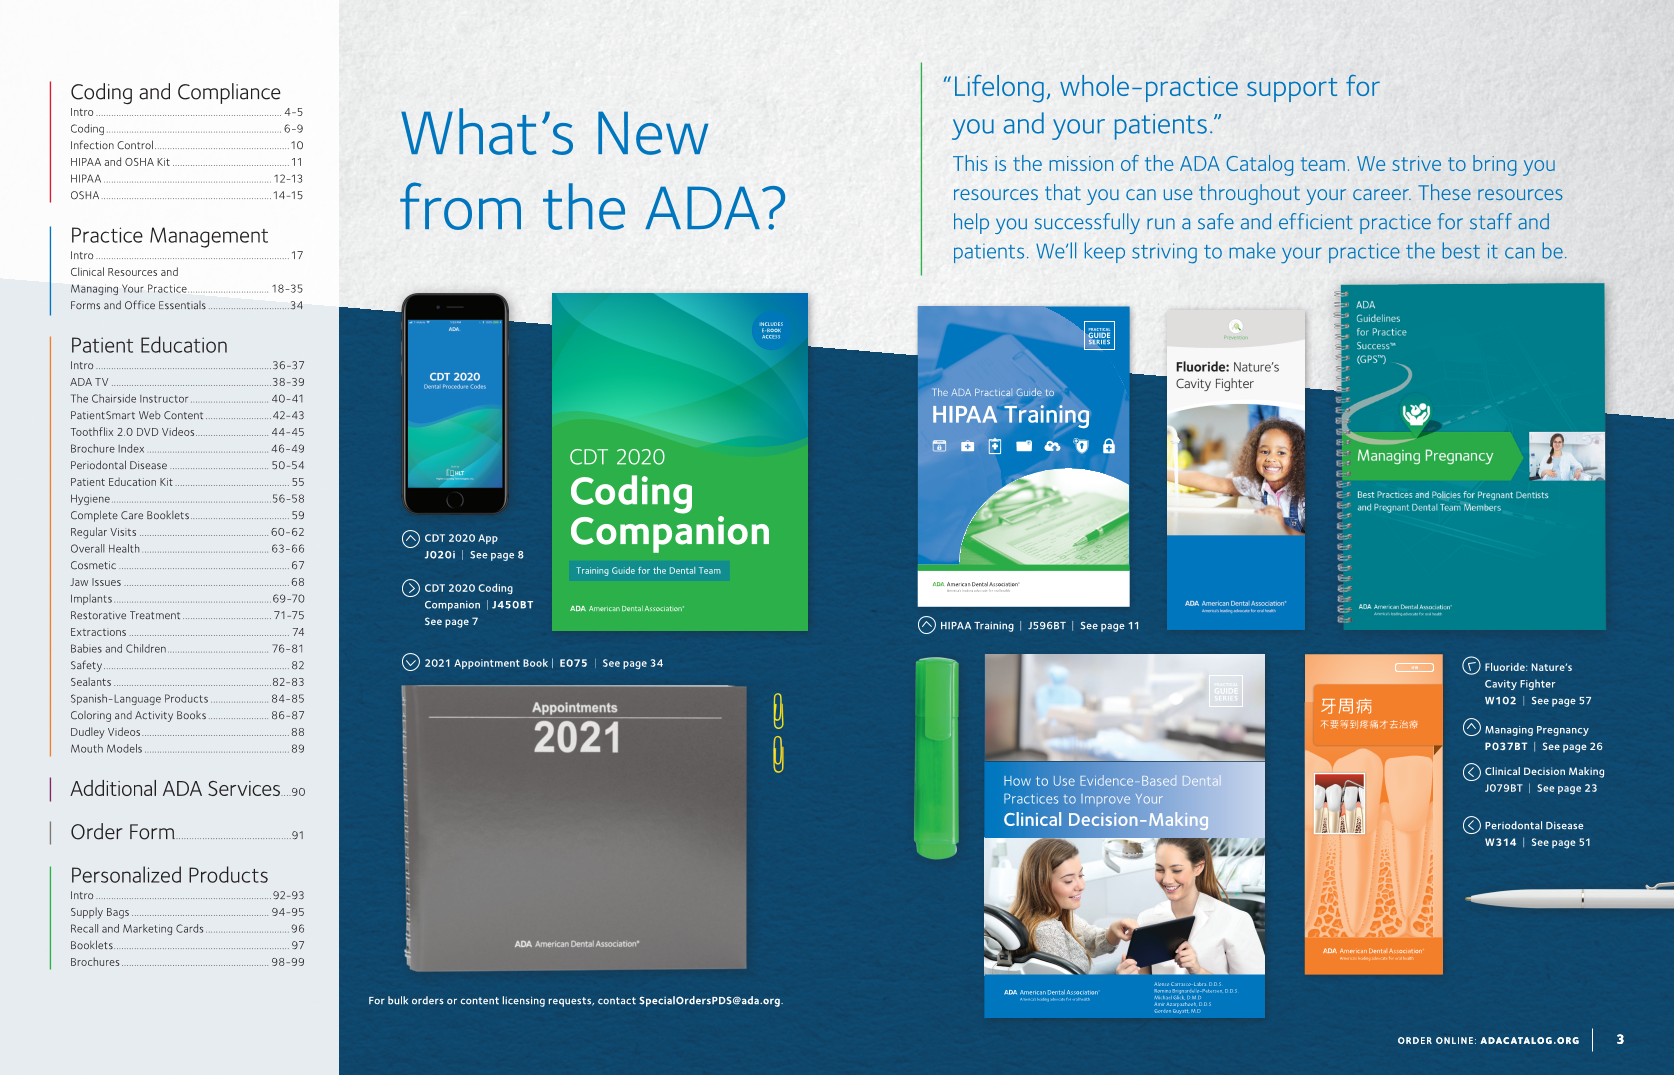 ADA Catalog 2020 (published in January 2020) page 2